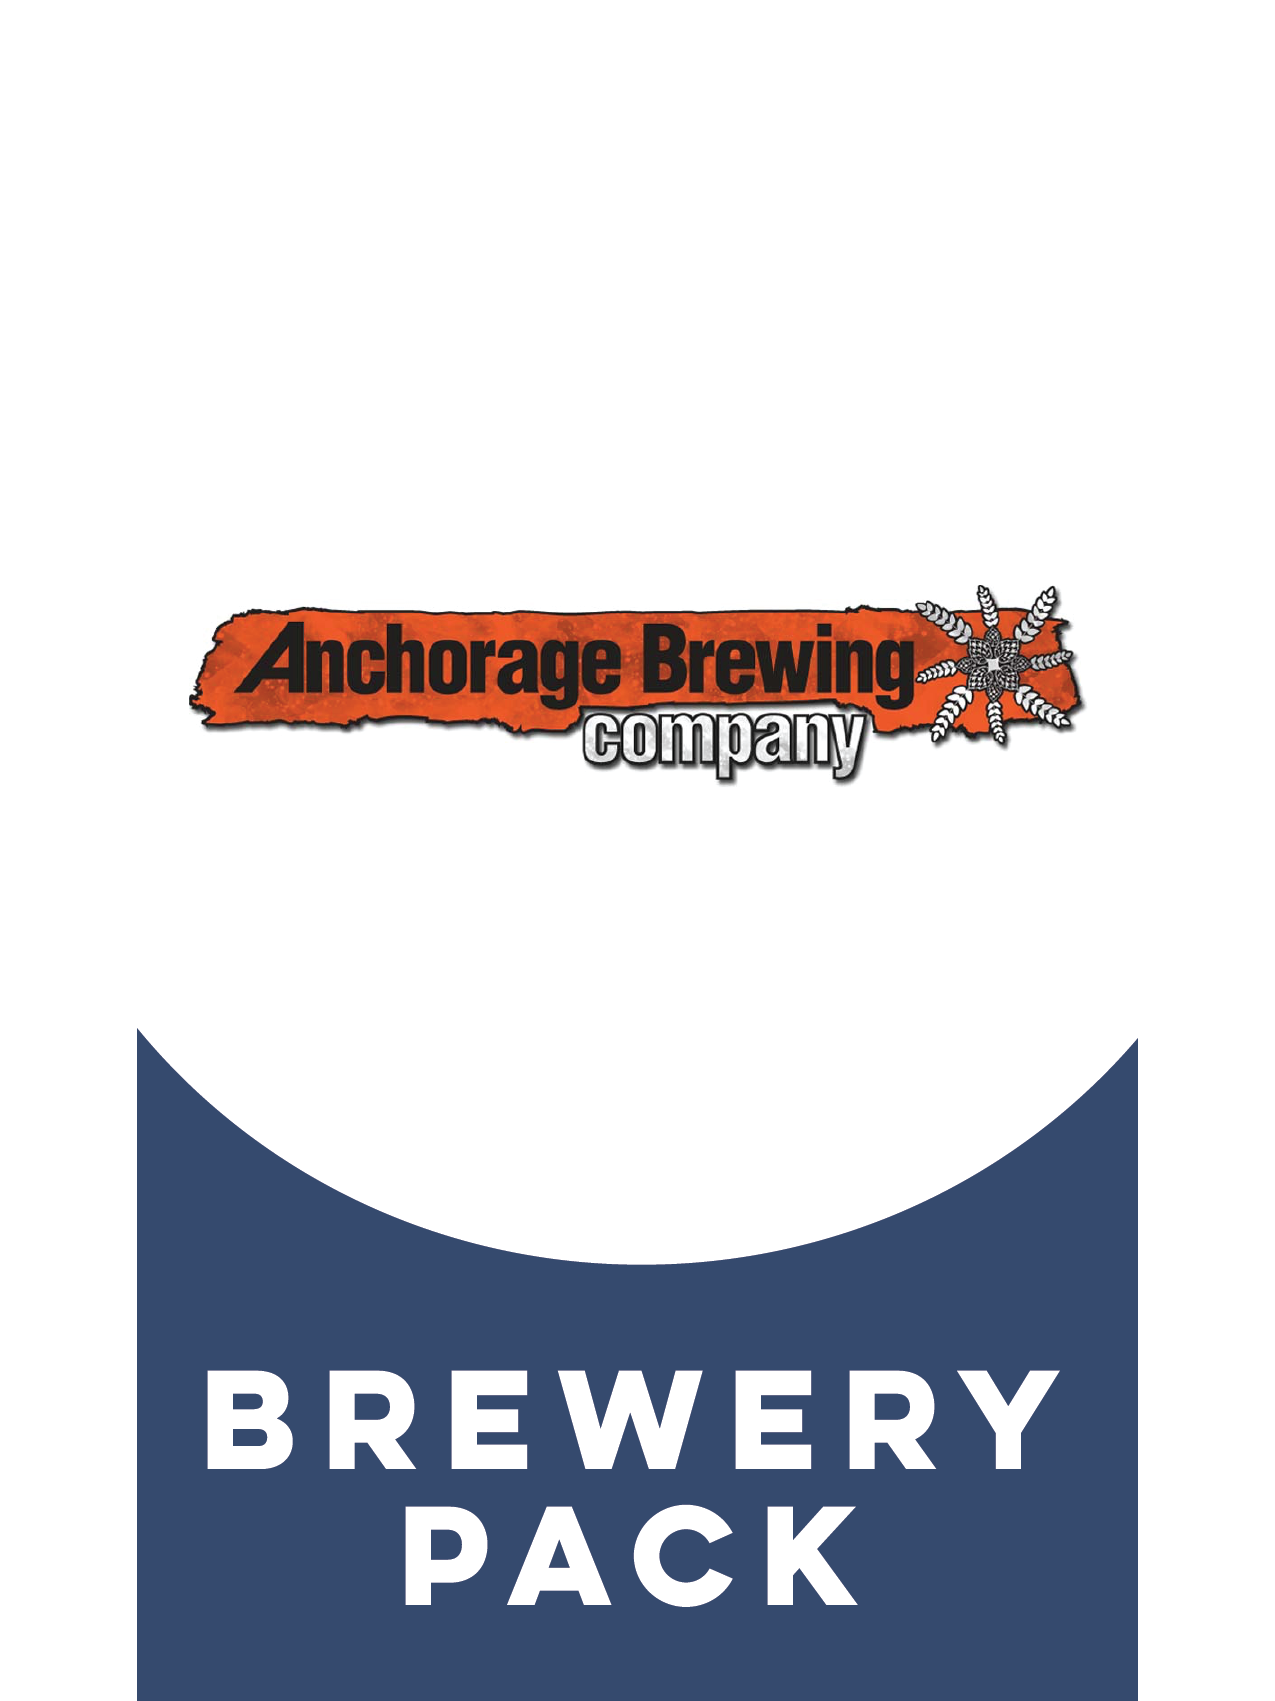 -Anchorage- Anchorage Brewery Pack-Packs & Cases- Only @ Beer Republic - The best online beer store for American & Canadian craft beer - Buy beer online from the USA and Canada - Bier online kopen - Amerikaans bier kopen - Craft beer store - Craft beer kopen - Amerikanisch bier kaufen - Bier online kaufen - Acheter biere online - IPA - Stout - Porter - New England IPA - Hazy IPA - Imperial Stout - Barrel Aged - Barrel Aged Imperial Stout - Brown - Dark beer - Blond - Blonde - Pilsner - Lager - Wheat - Weize